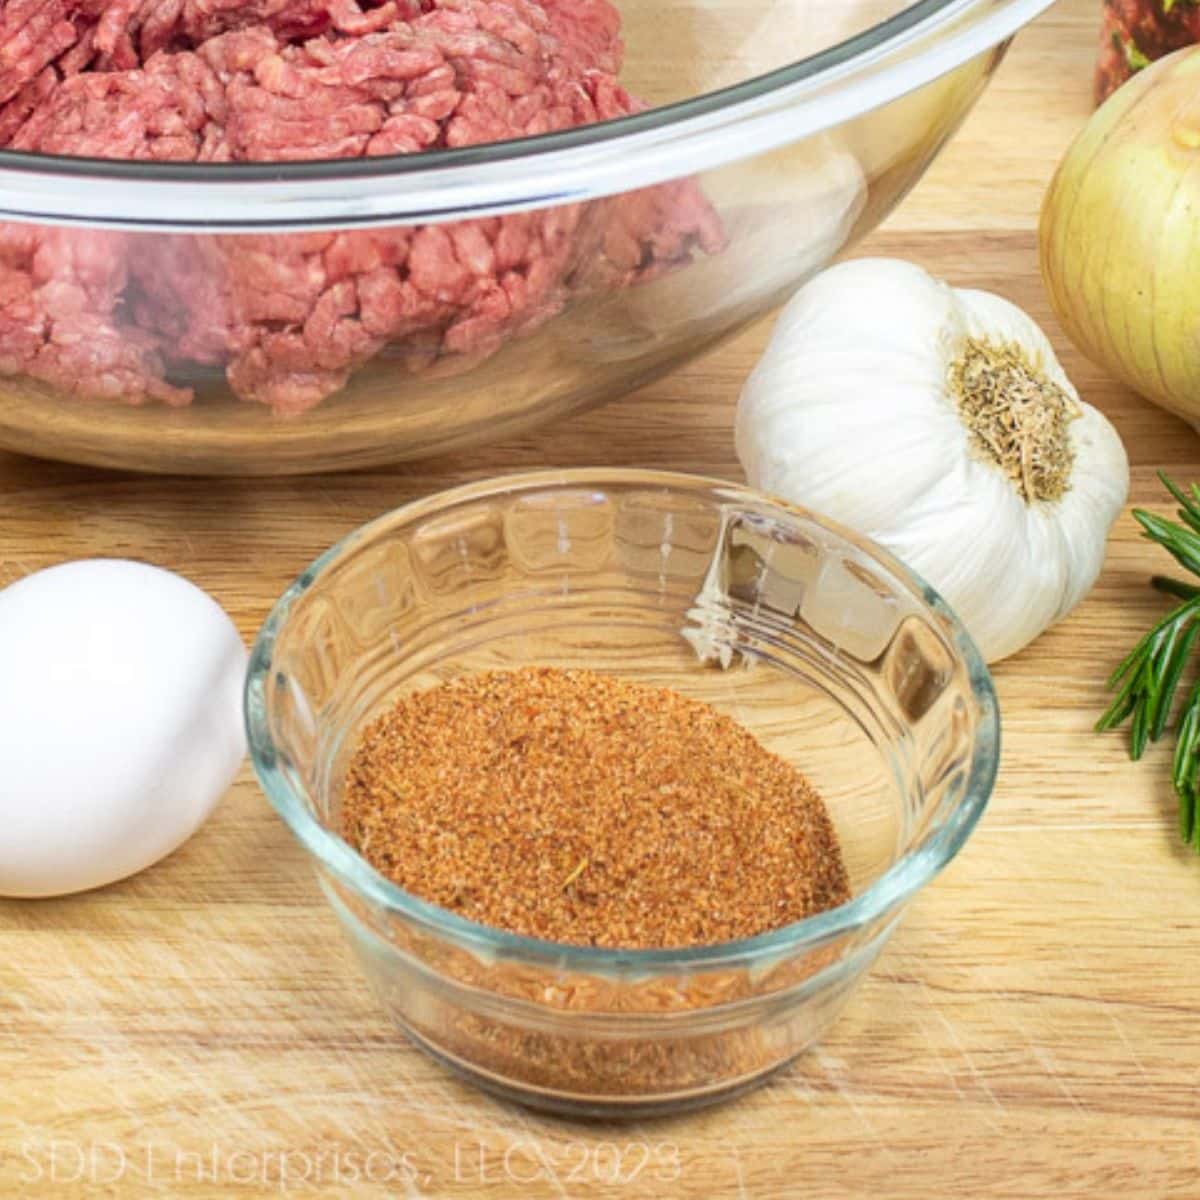 cajun seasonings in a bowl with other ingredients on a cutting board